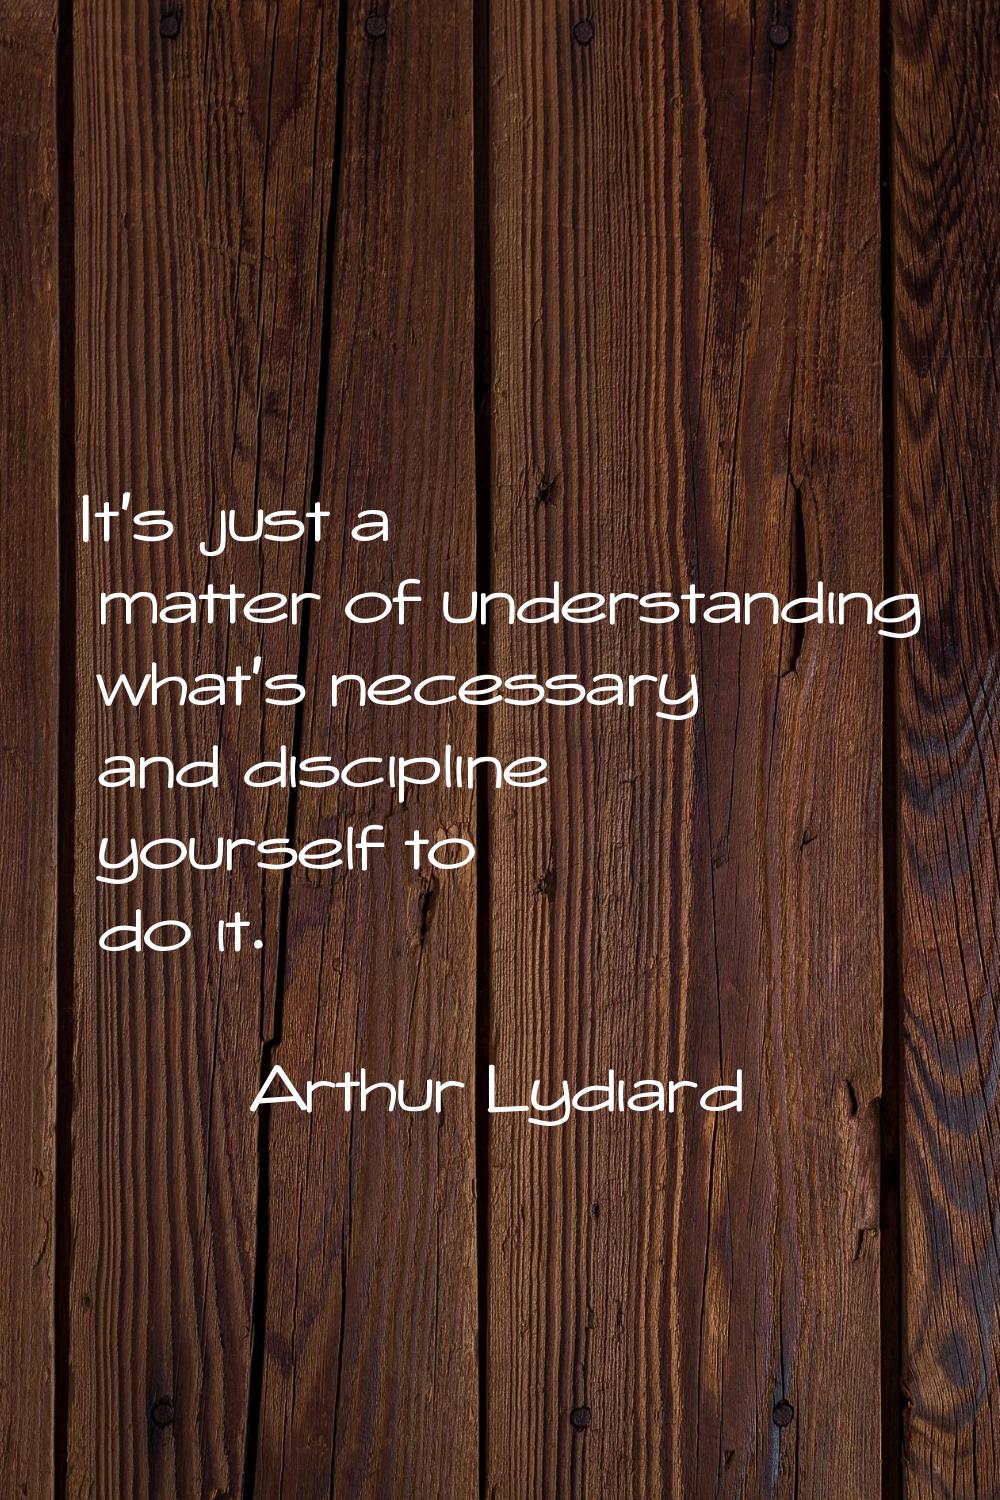 It's just a matter of understanding what's necessary and discipline yourself to do it.